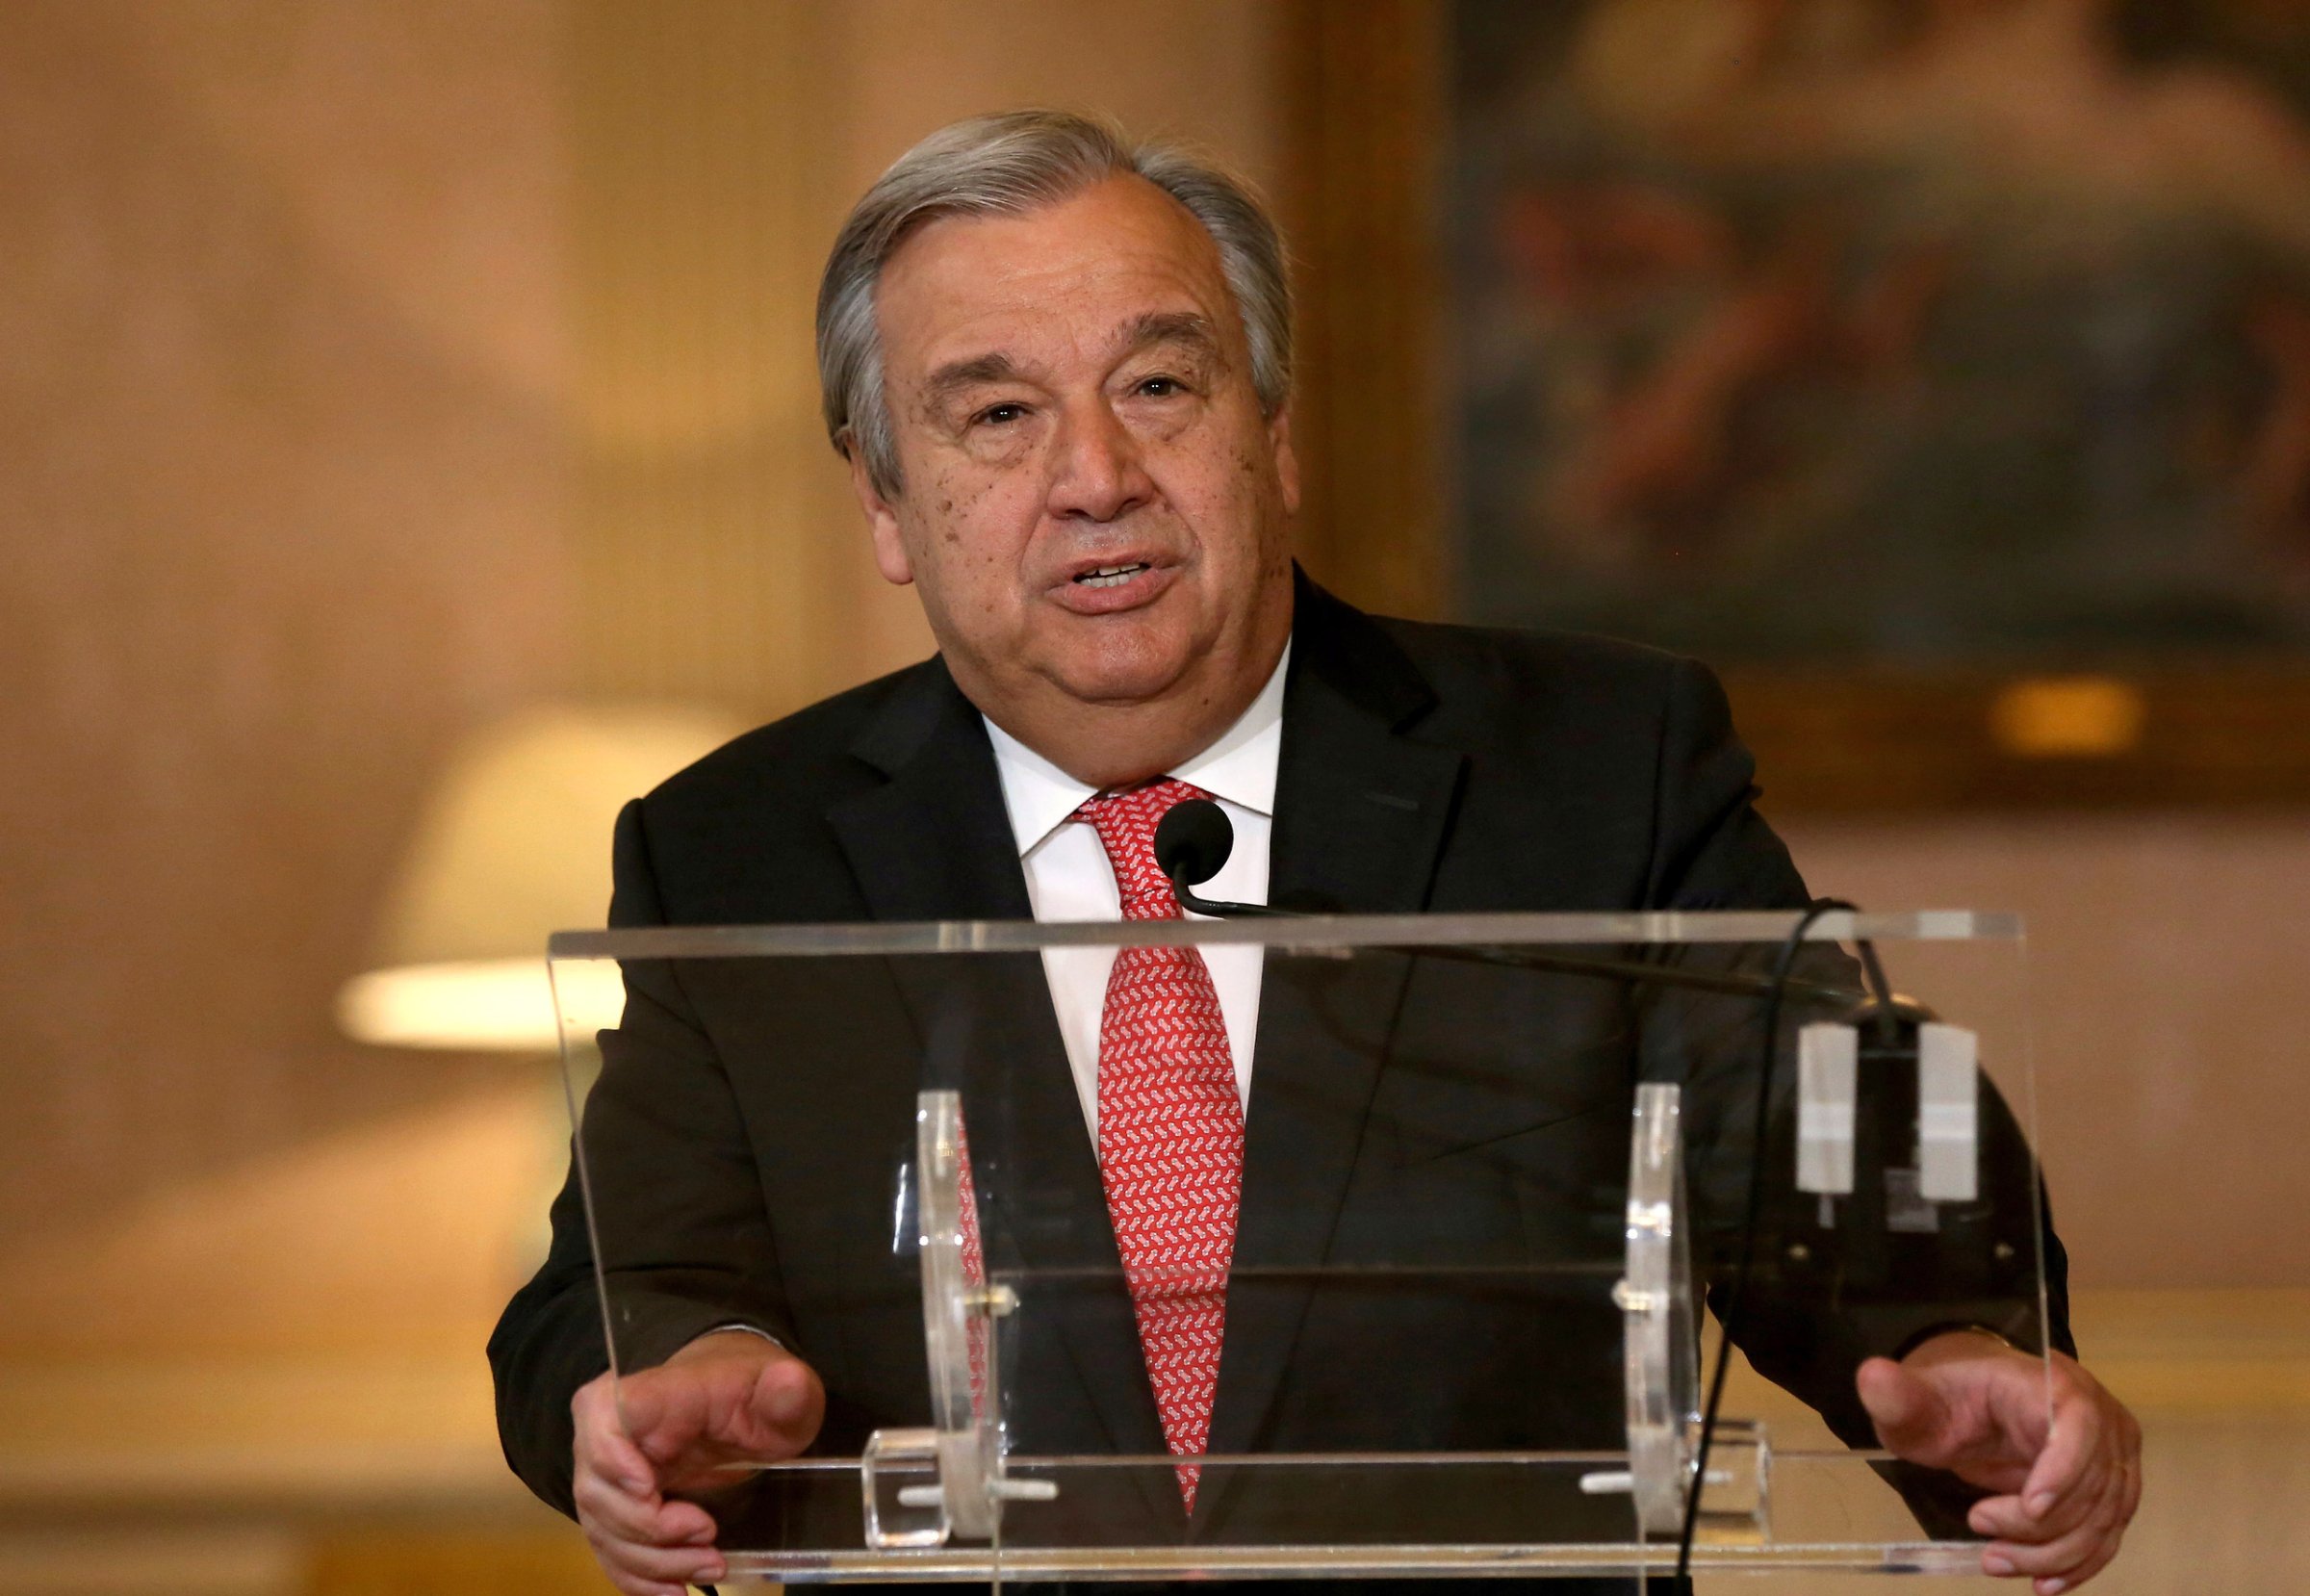 The newly appointed Secretary General of the United Nations, Antonio Guterres, reads a statement at Lisbon's Necessidades palace after the formal election took place this morning at the organisation's headquarters, Thursday, Oct. 6, 2016. The probable next U.N. secretary-general says he faces "huge challenges" and hopes to see unity and consensus during his expected term at the international body. (AP Photo/Steven Governo)